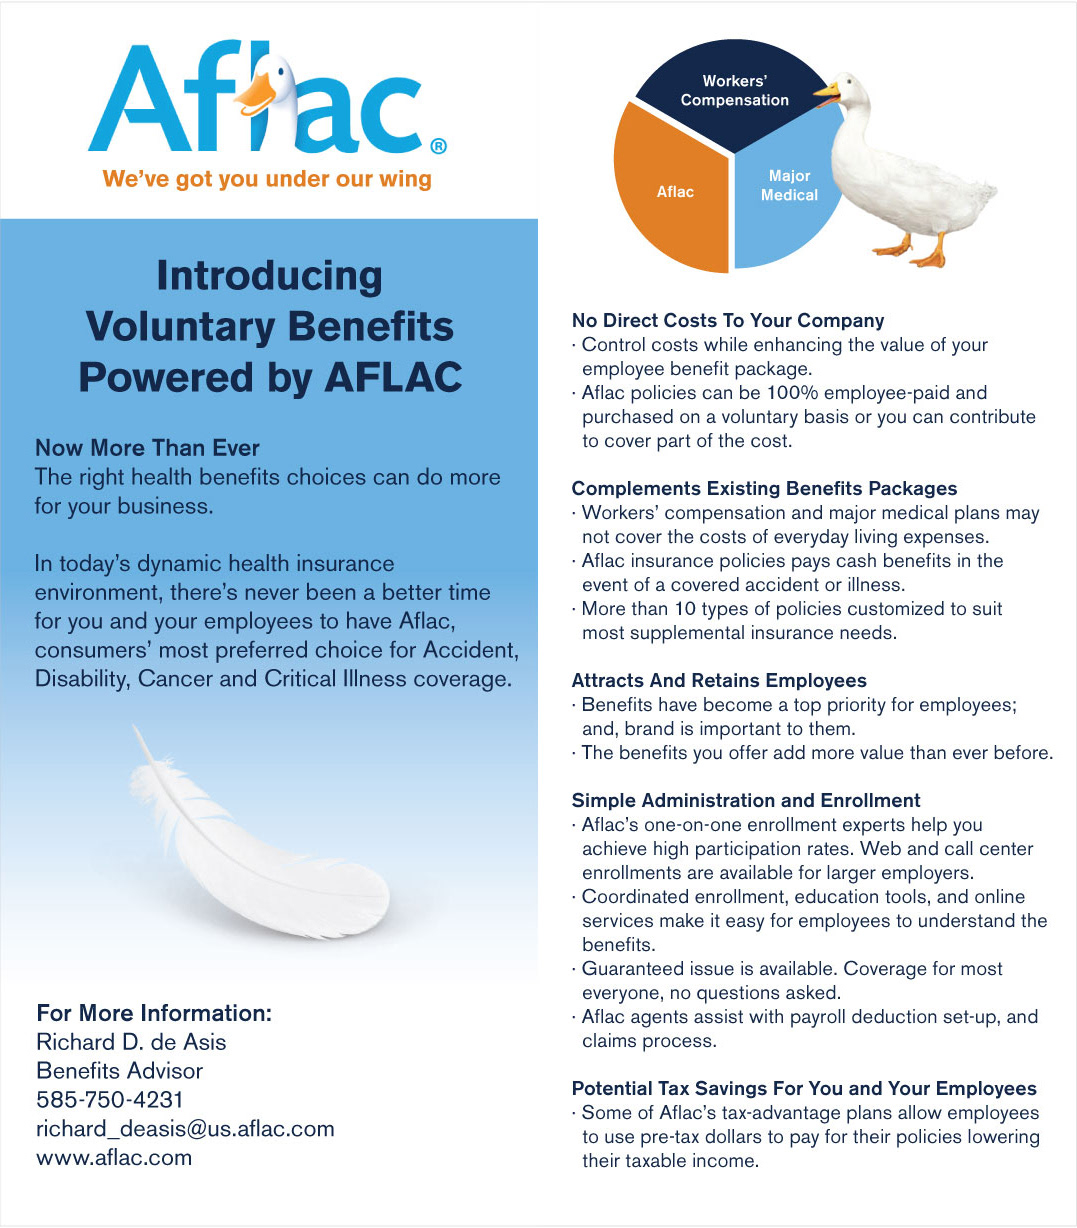 aflac duck benefits infographic information design Layout